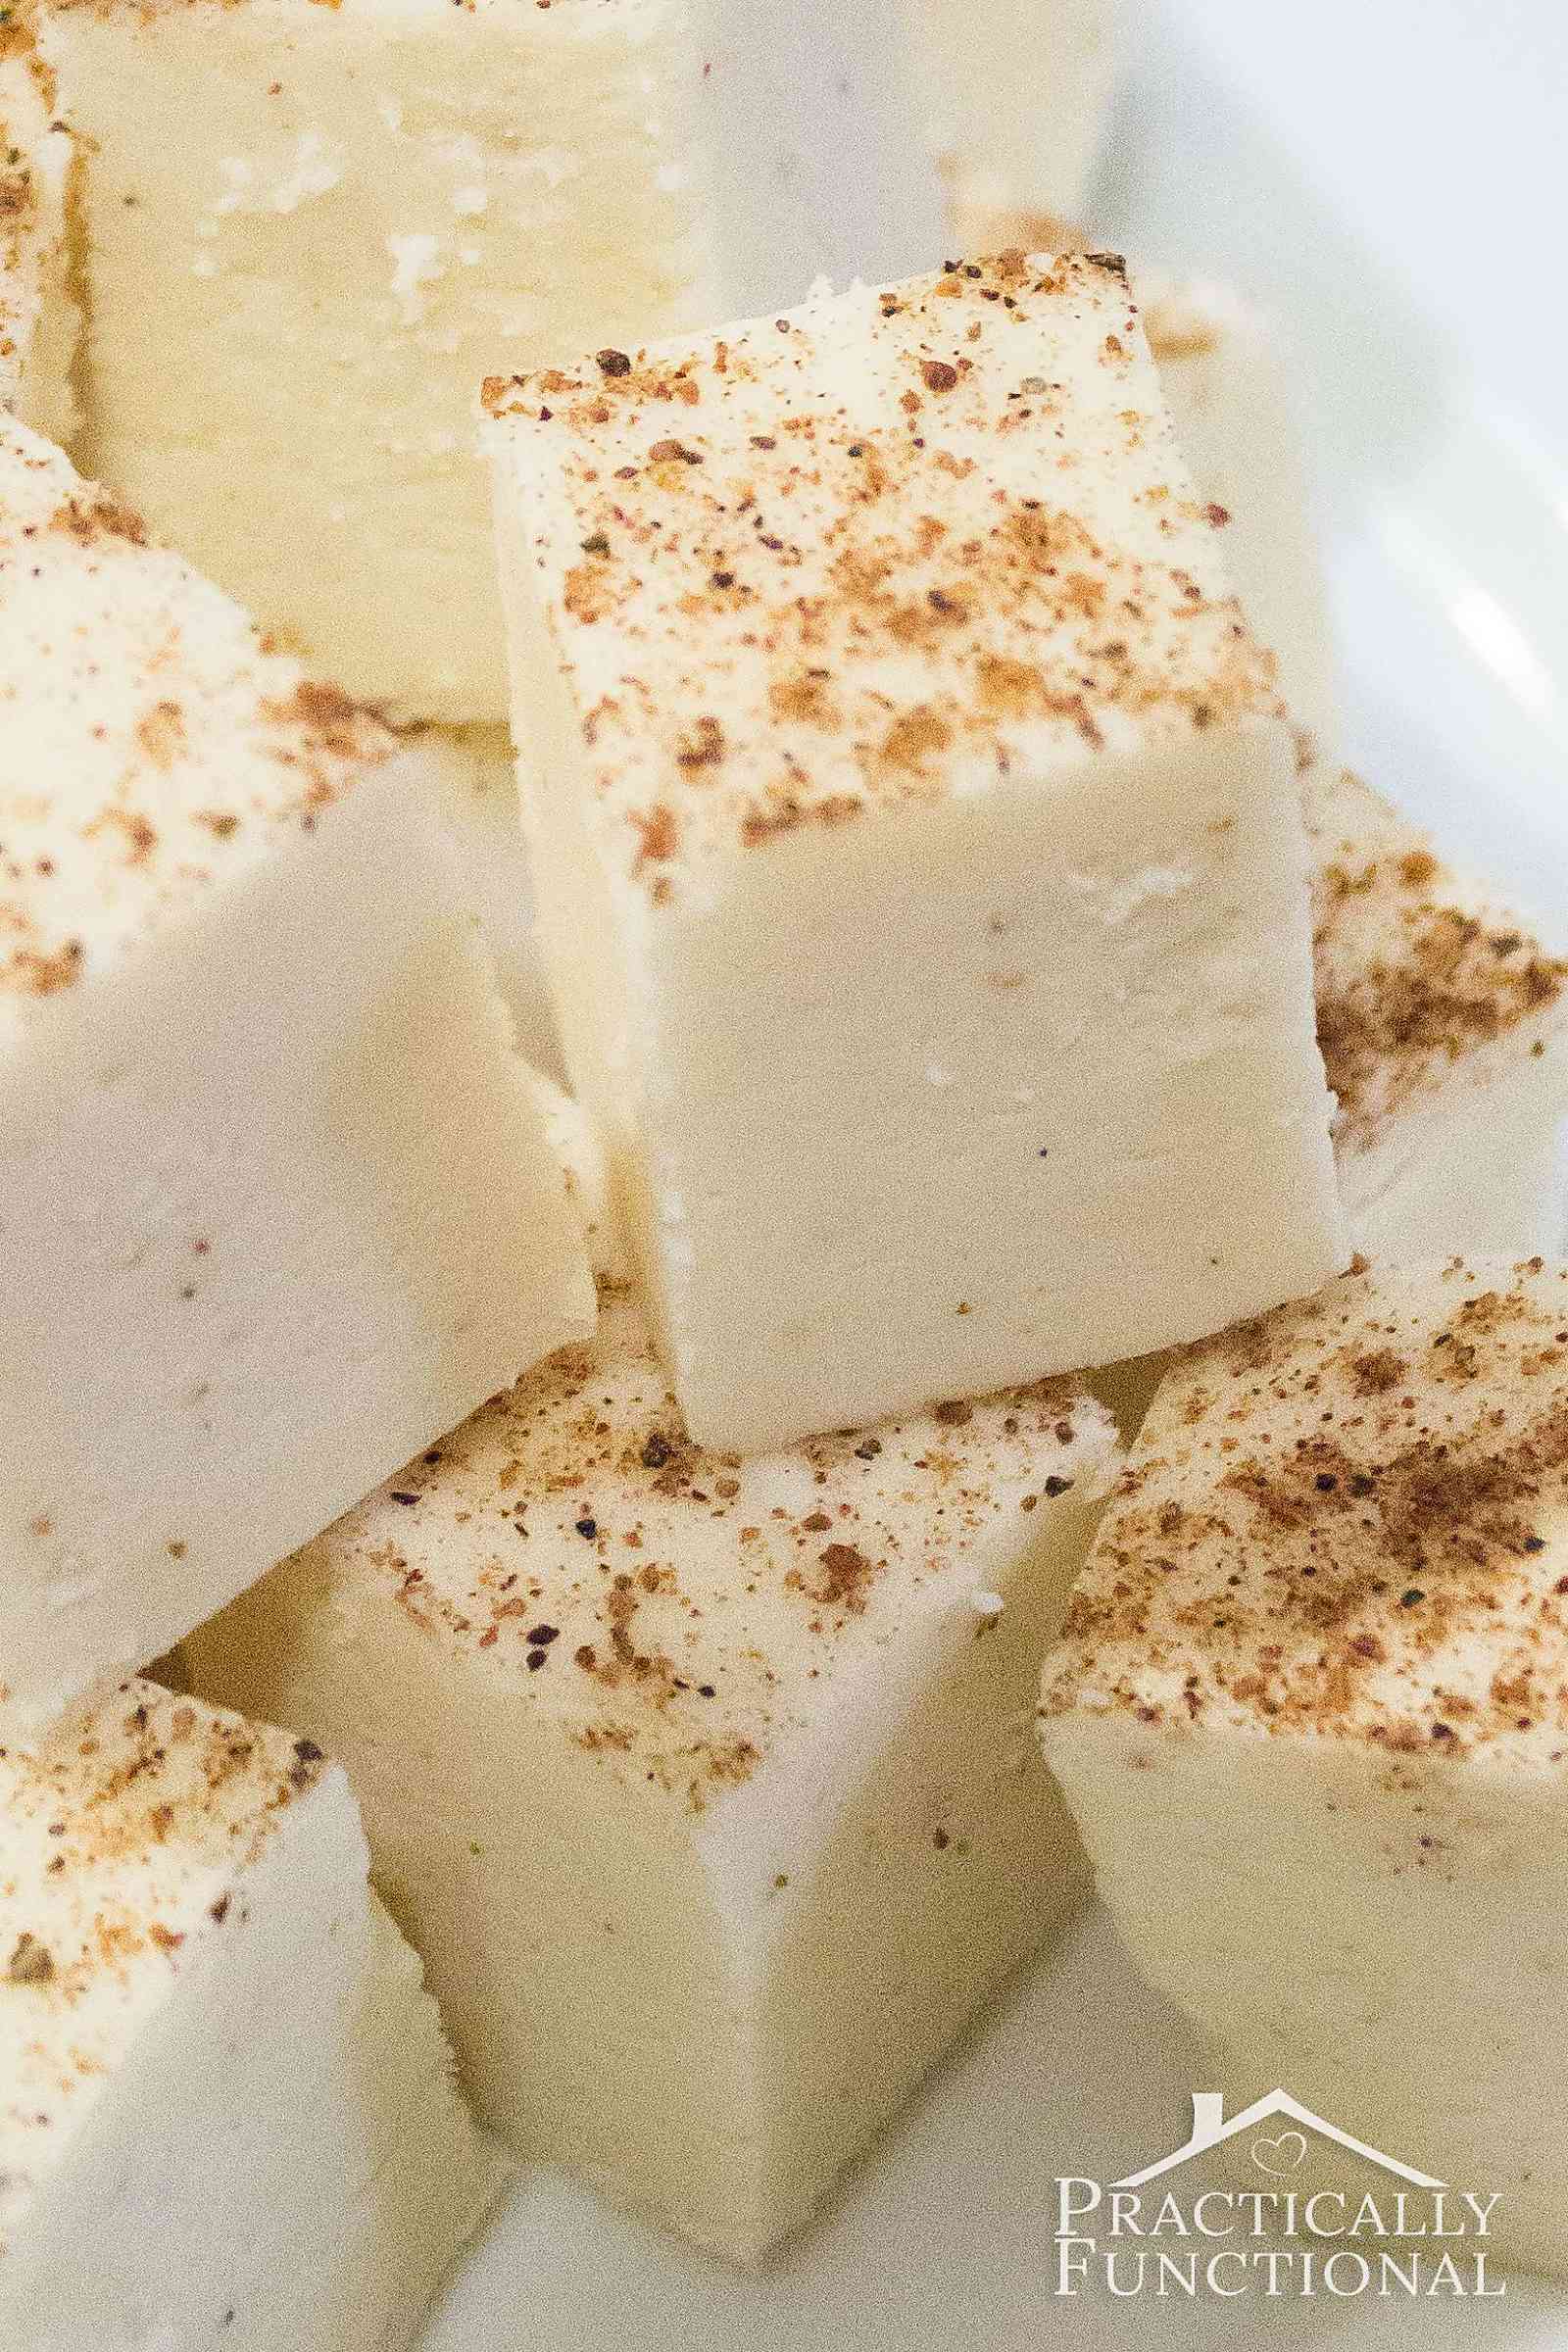 This homemade eggnog fudge recipe looks delicious! So easy to make, and great for holiday gifts!